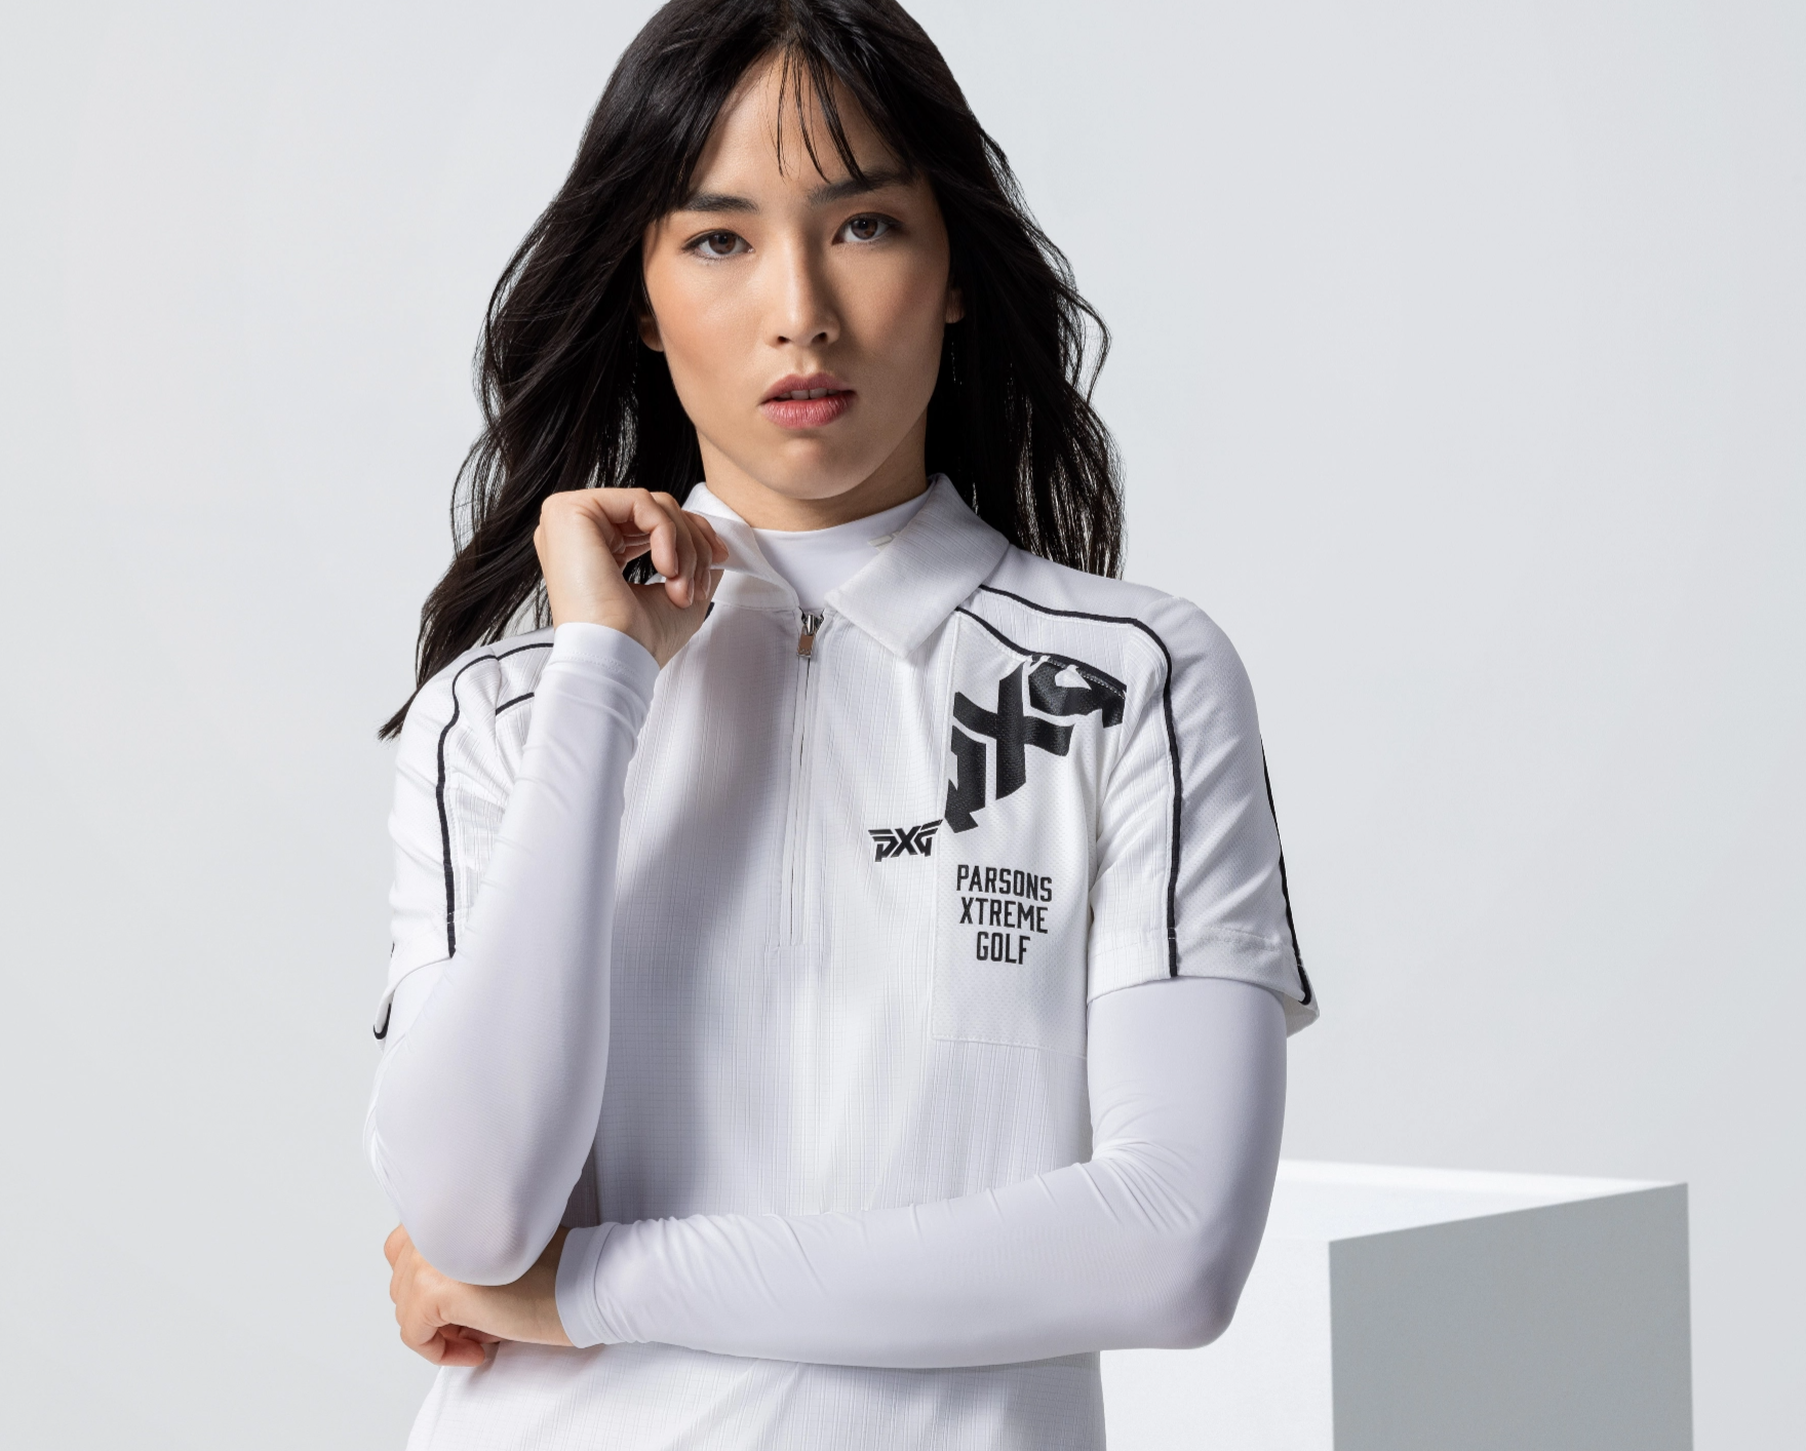 Woman in New fall white polo with while base layer on.